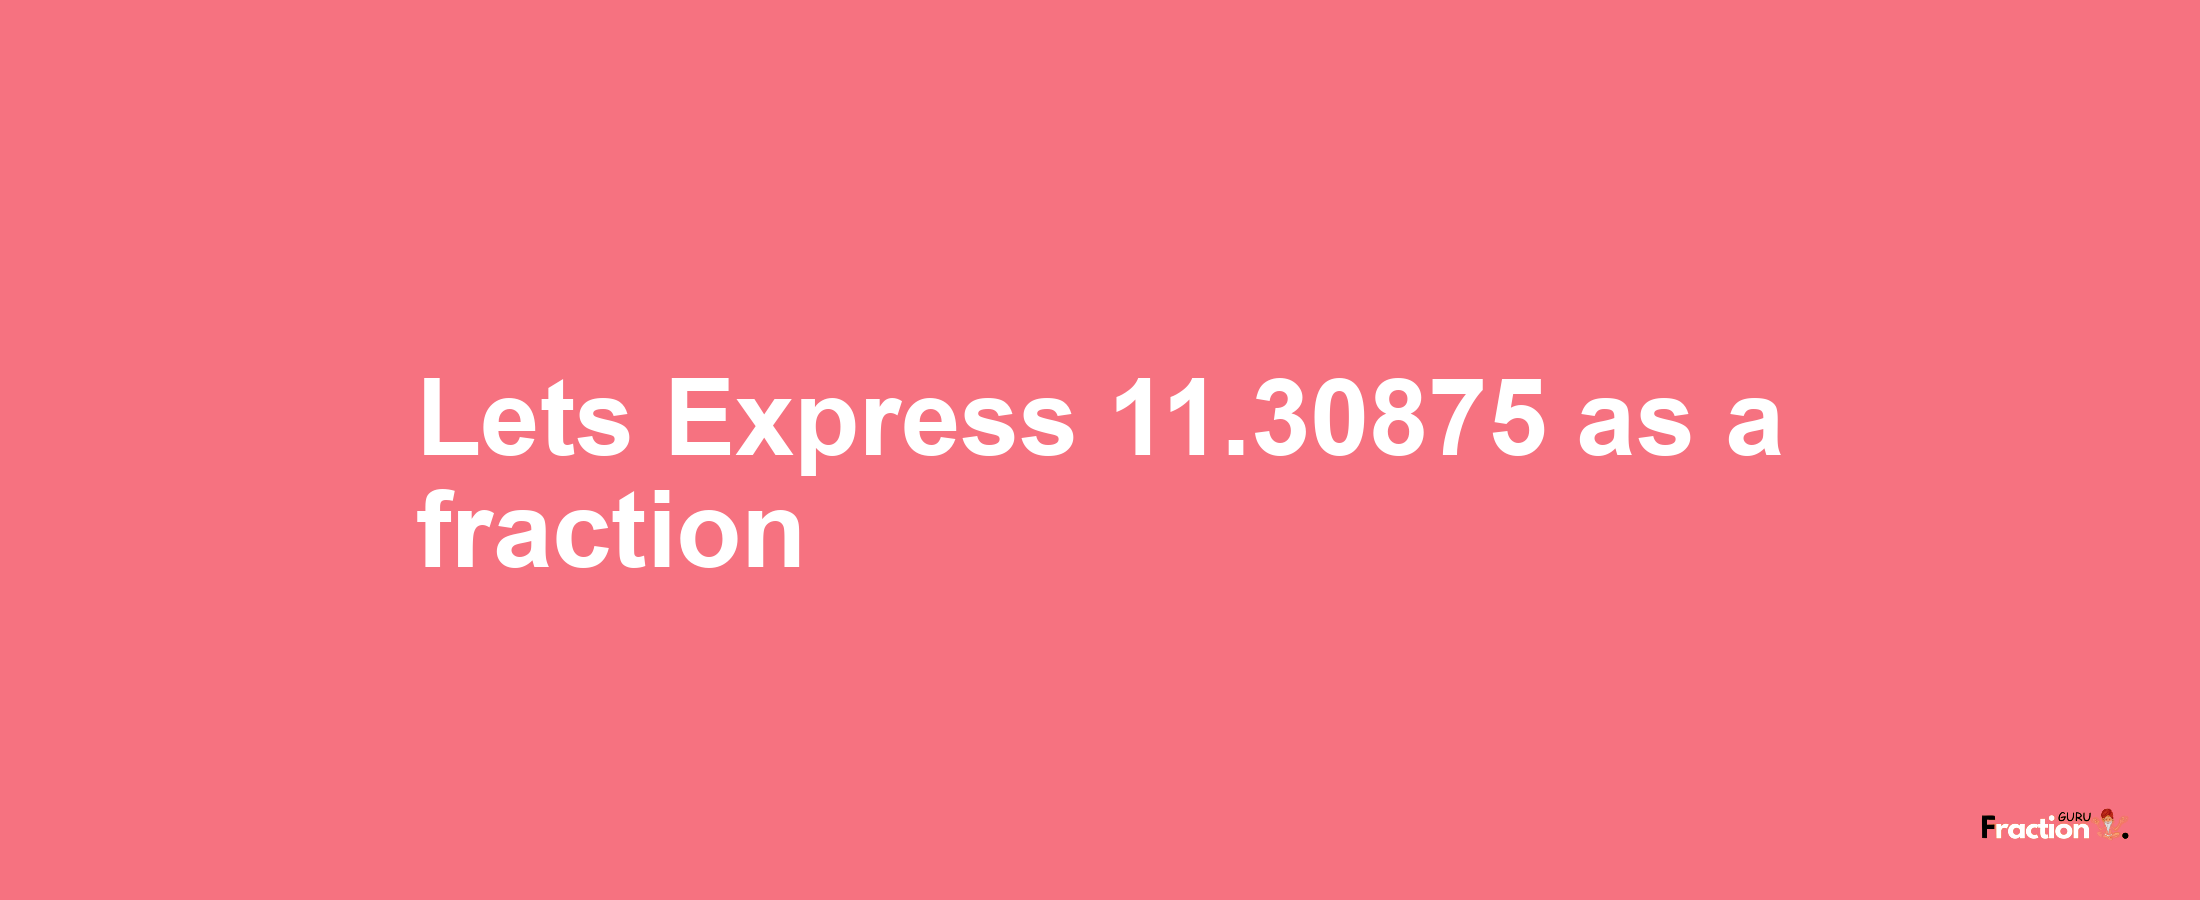 Lets Express 11.30875 as afraction